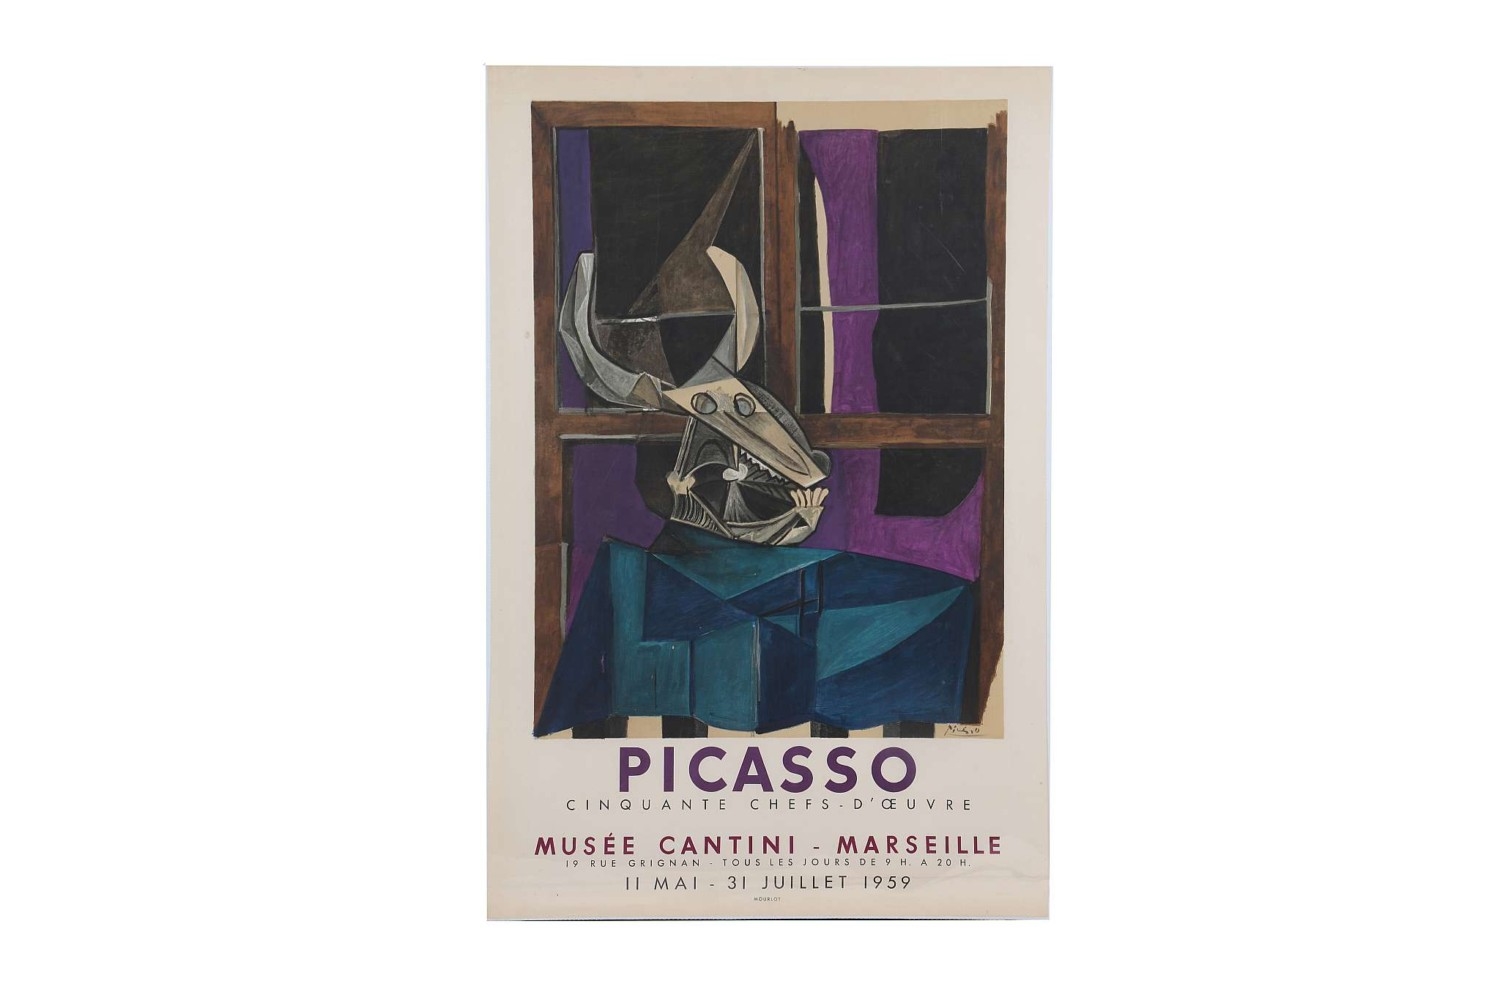 'Picasso, Fifty Masterpieces' by Pablo Picasso, 1959